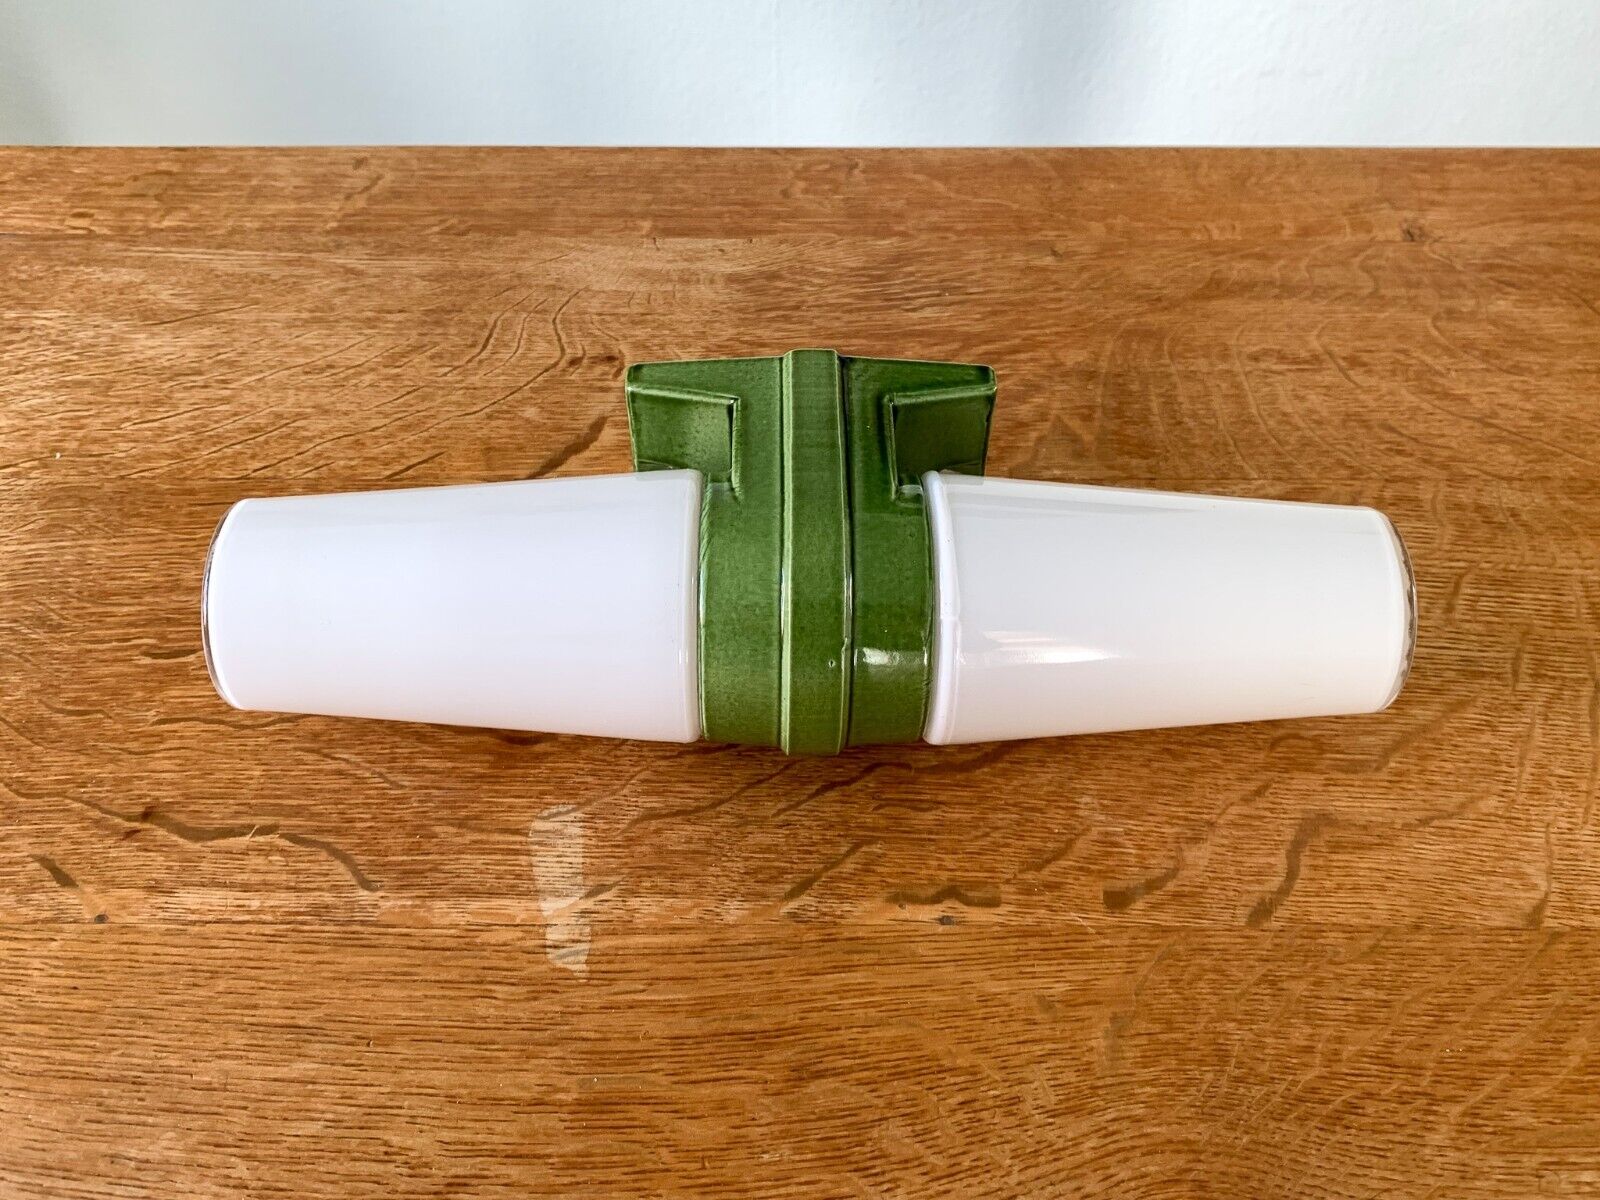 Unique Vintage 1960s IFÖ Wall Sconce - White Glass Shade and Green Ceramic Base